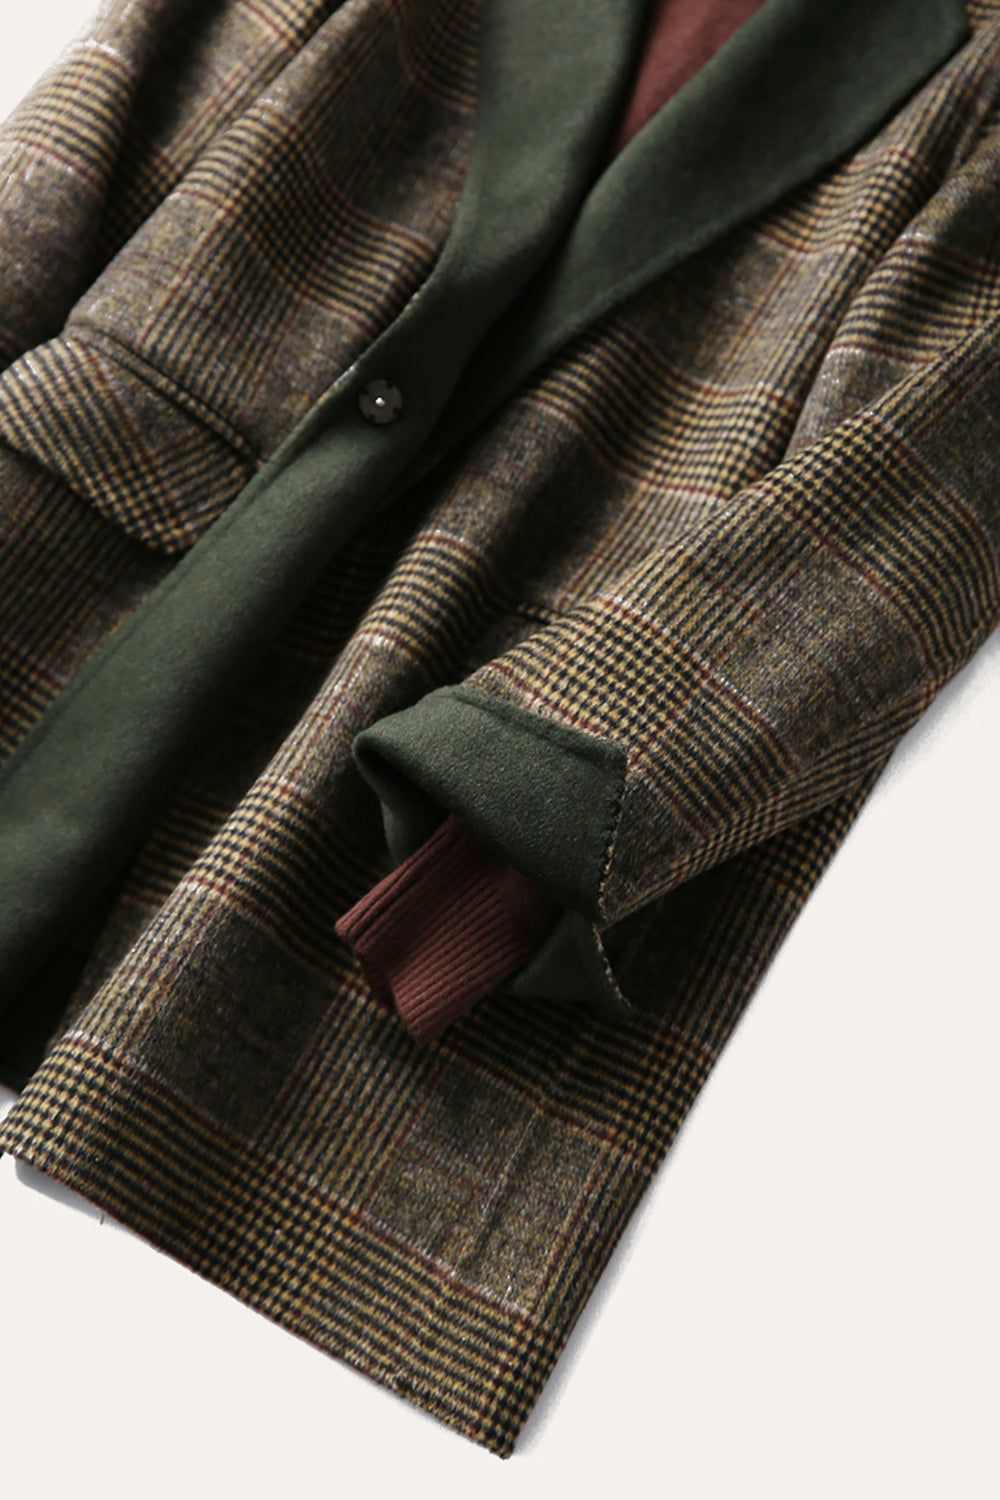 Stylish Ways to Wear a Plaid Wool Coat
This Winter